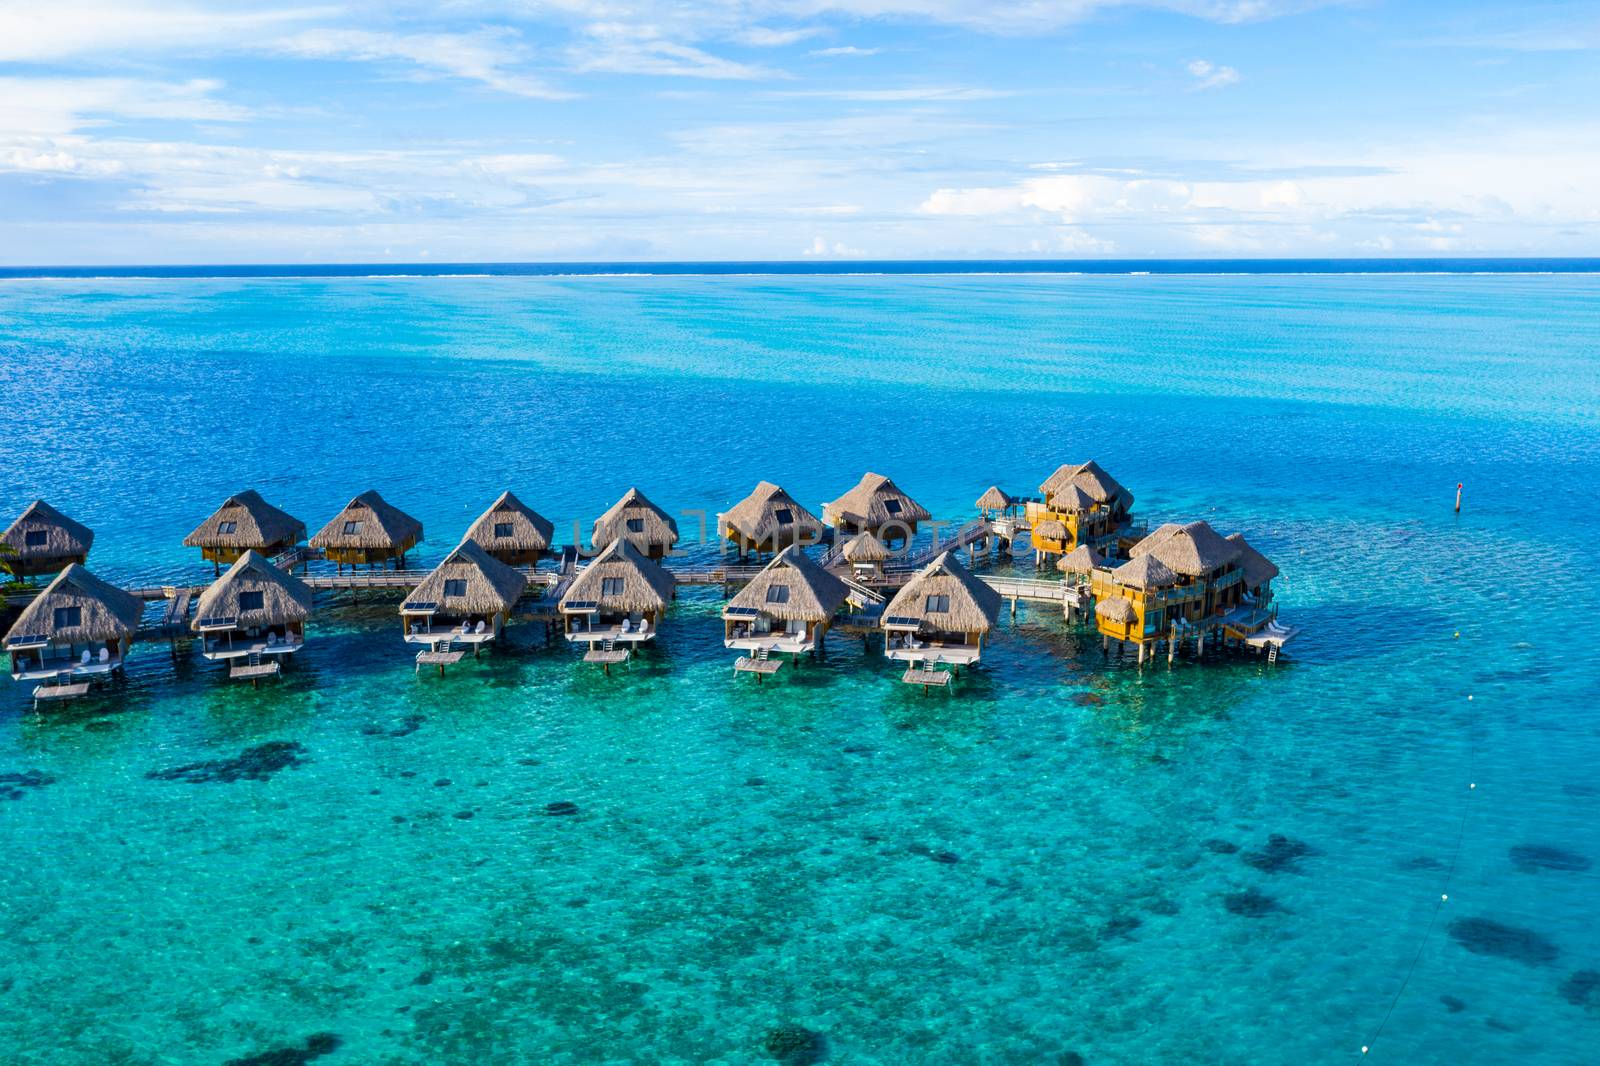 Travel vacation paradise aerial image with overwater bungalows in coral reef sea by Maridav